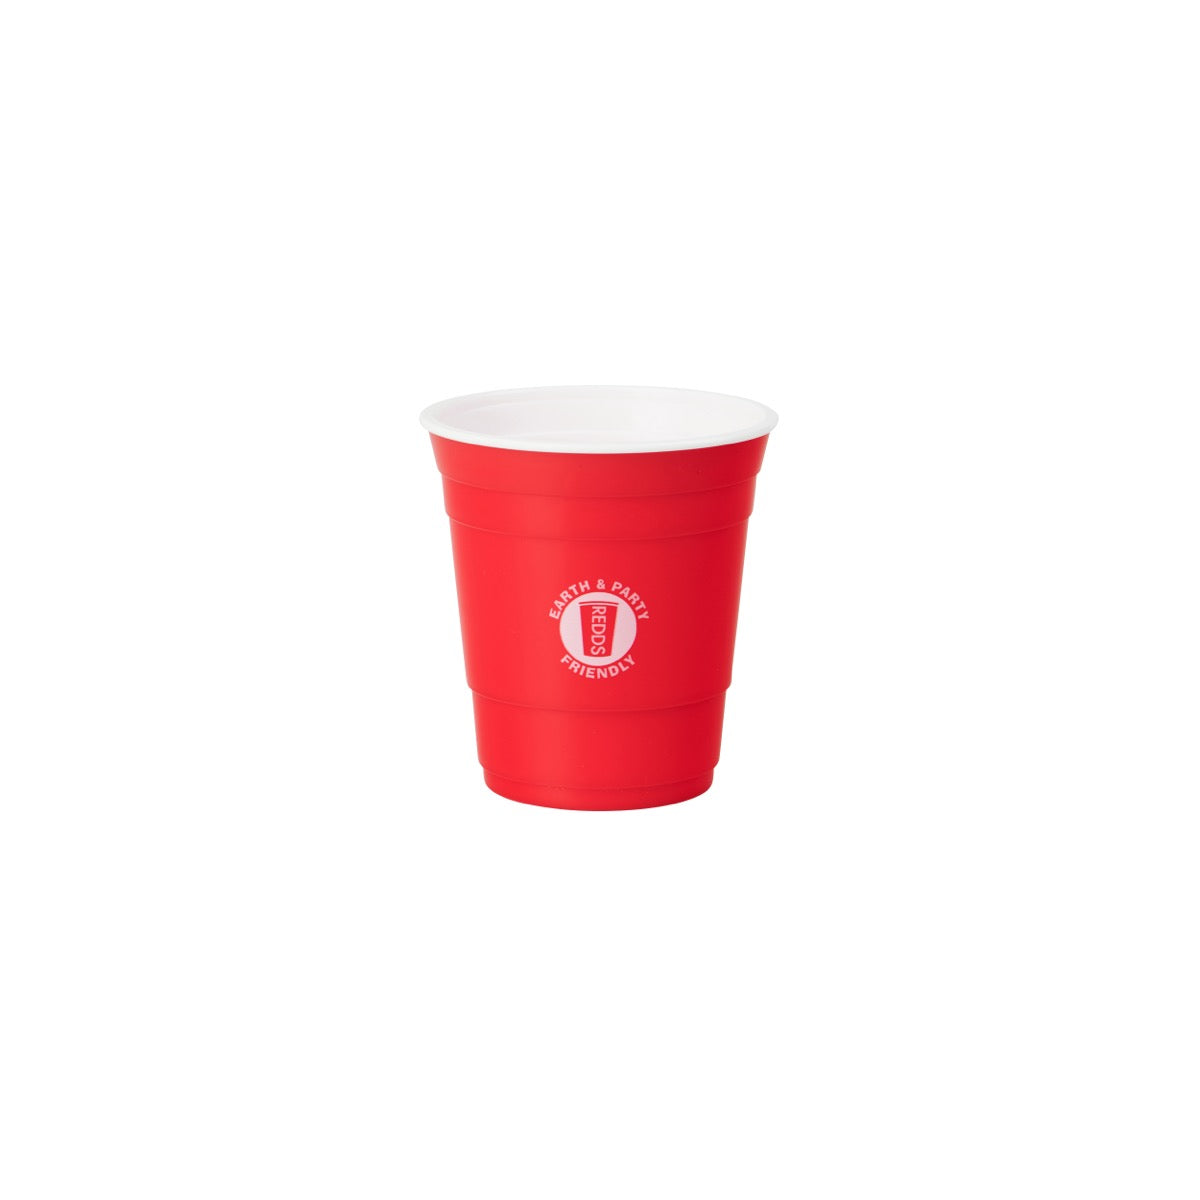 RCRE285RD3 Redds Redds Minis Red Cup 285ml Tomkin Australia Hospitality Supplies